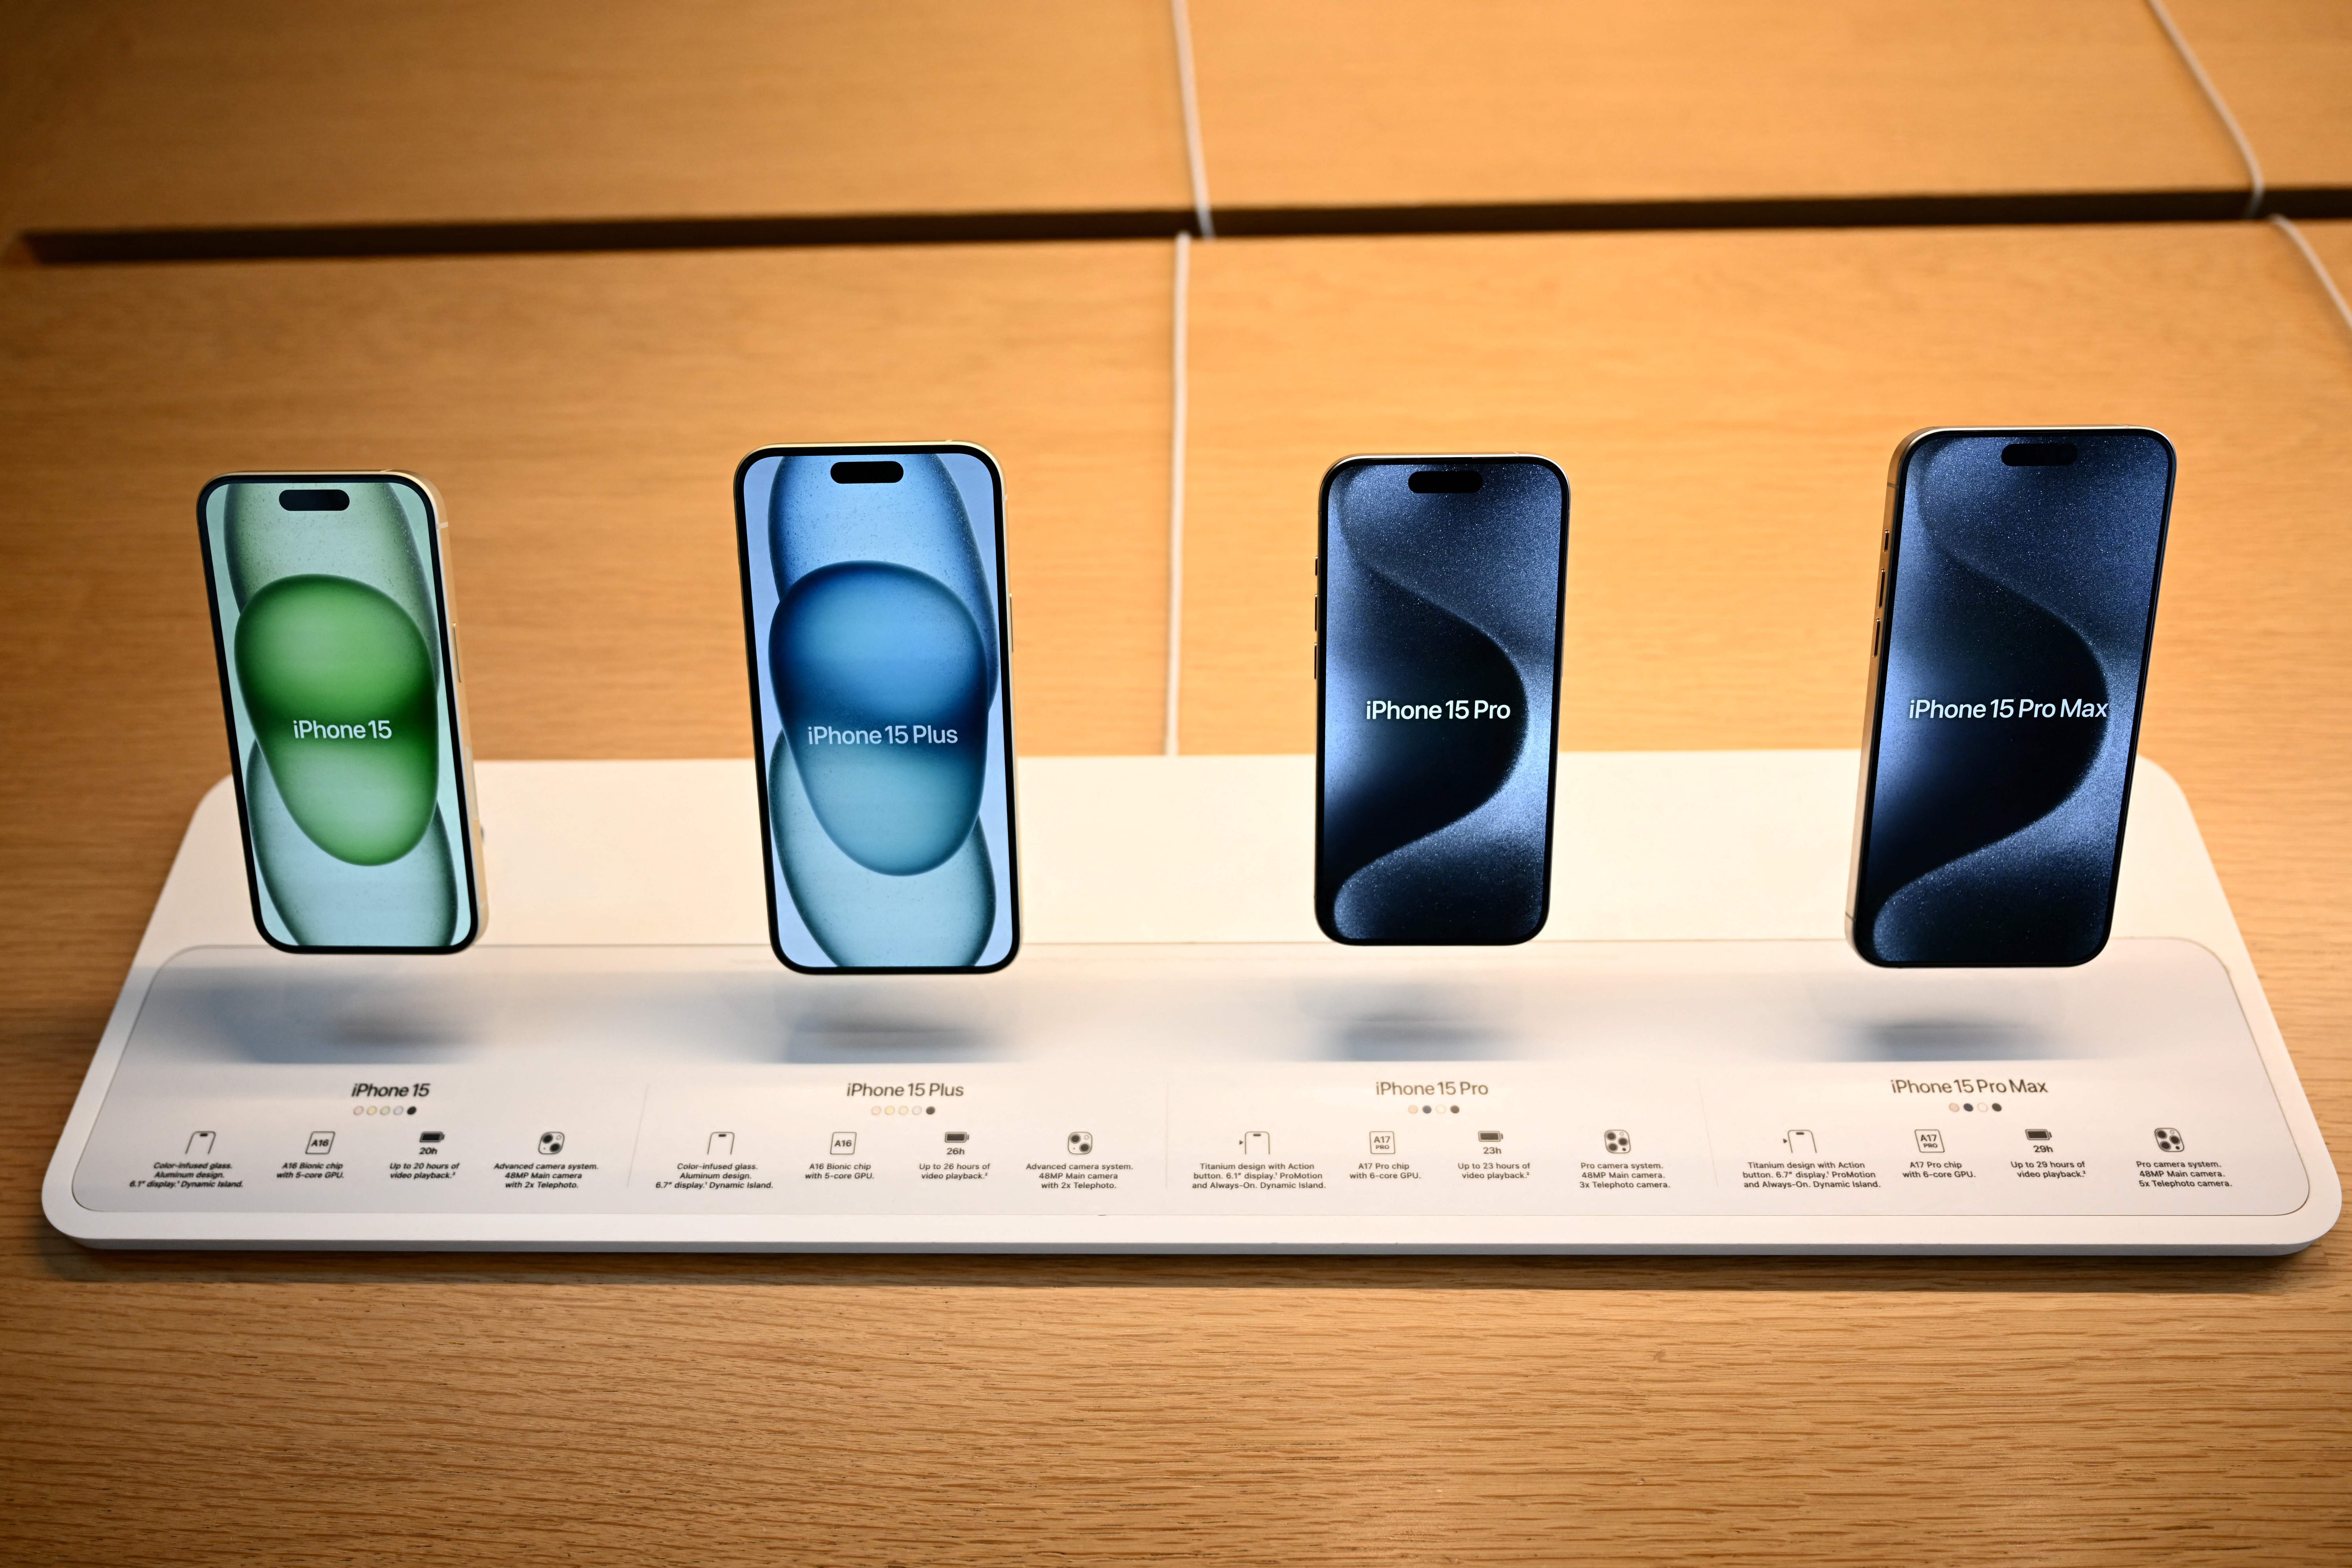 Apple iPhone 15 models are displayed at a store on the products’ release day in Los Angeles on September 22.